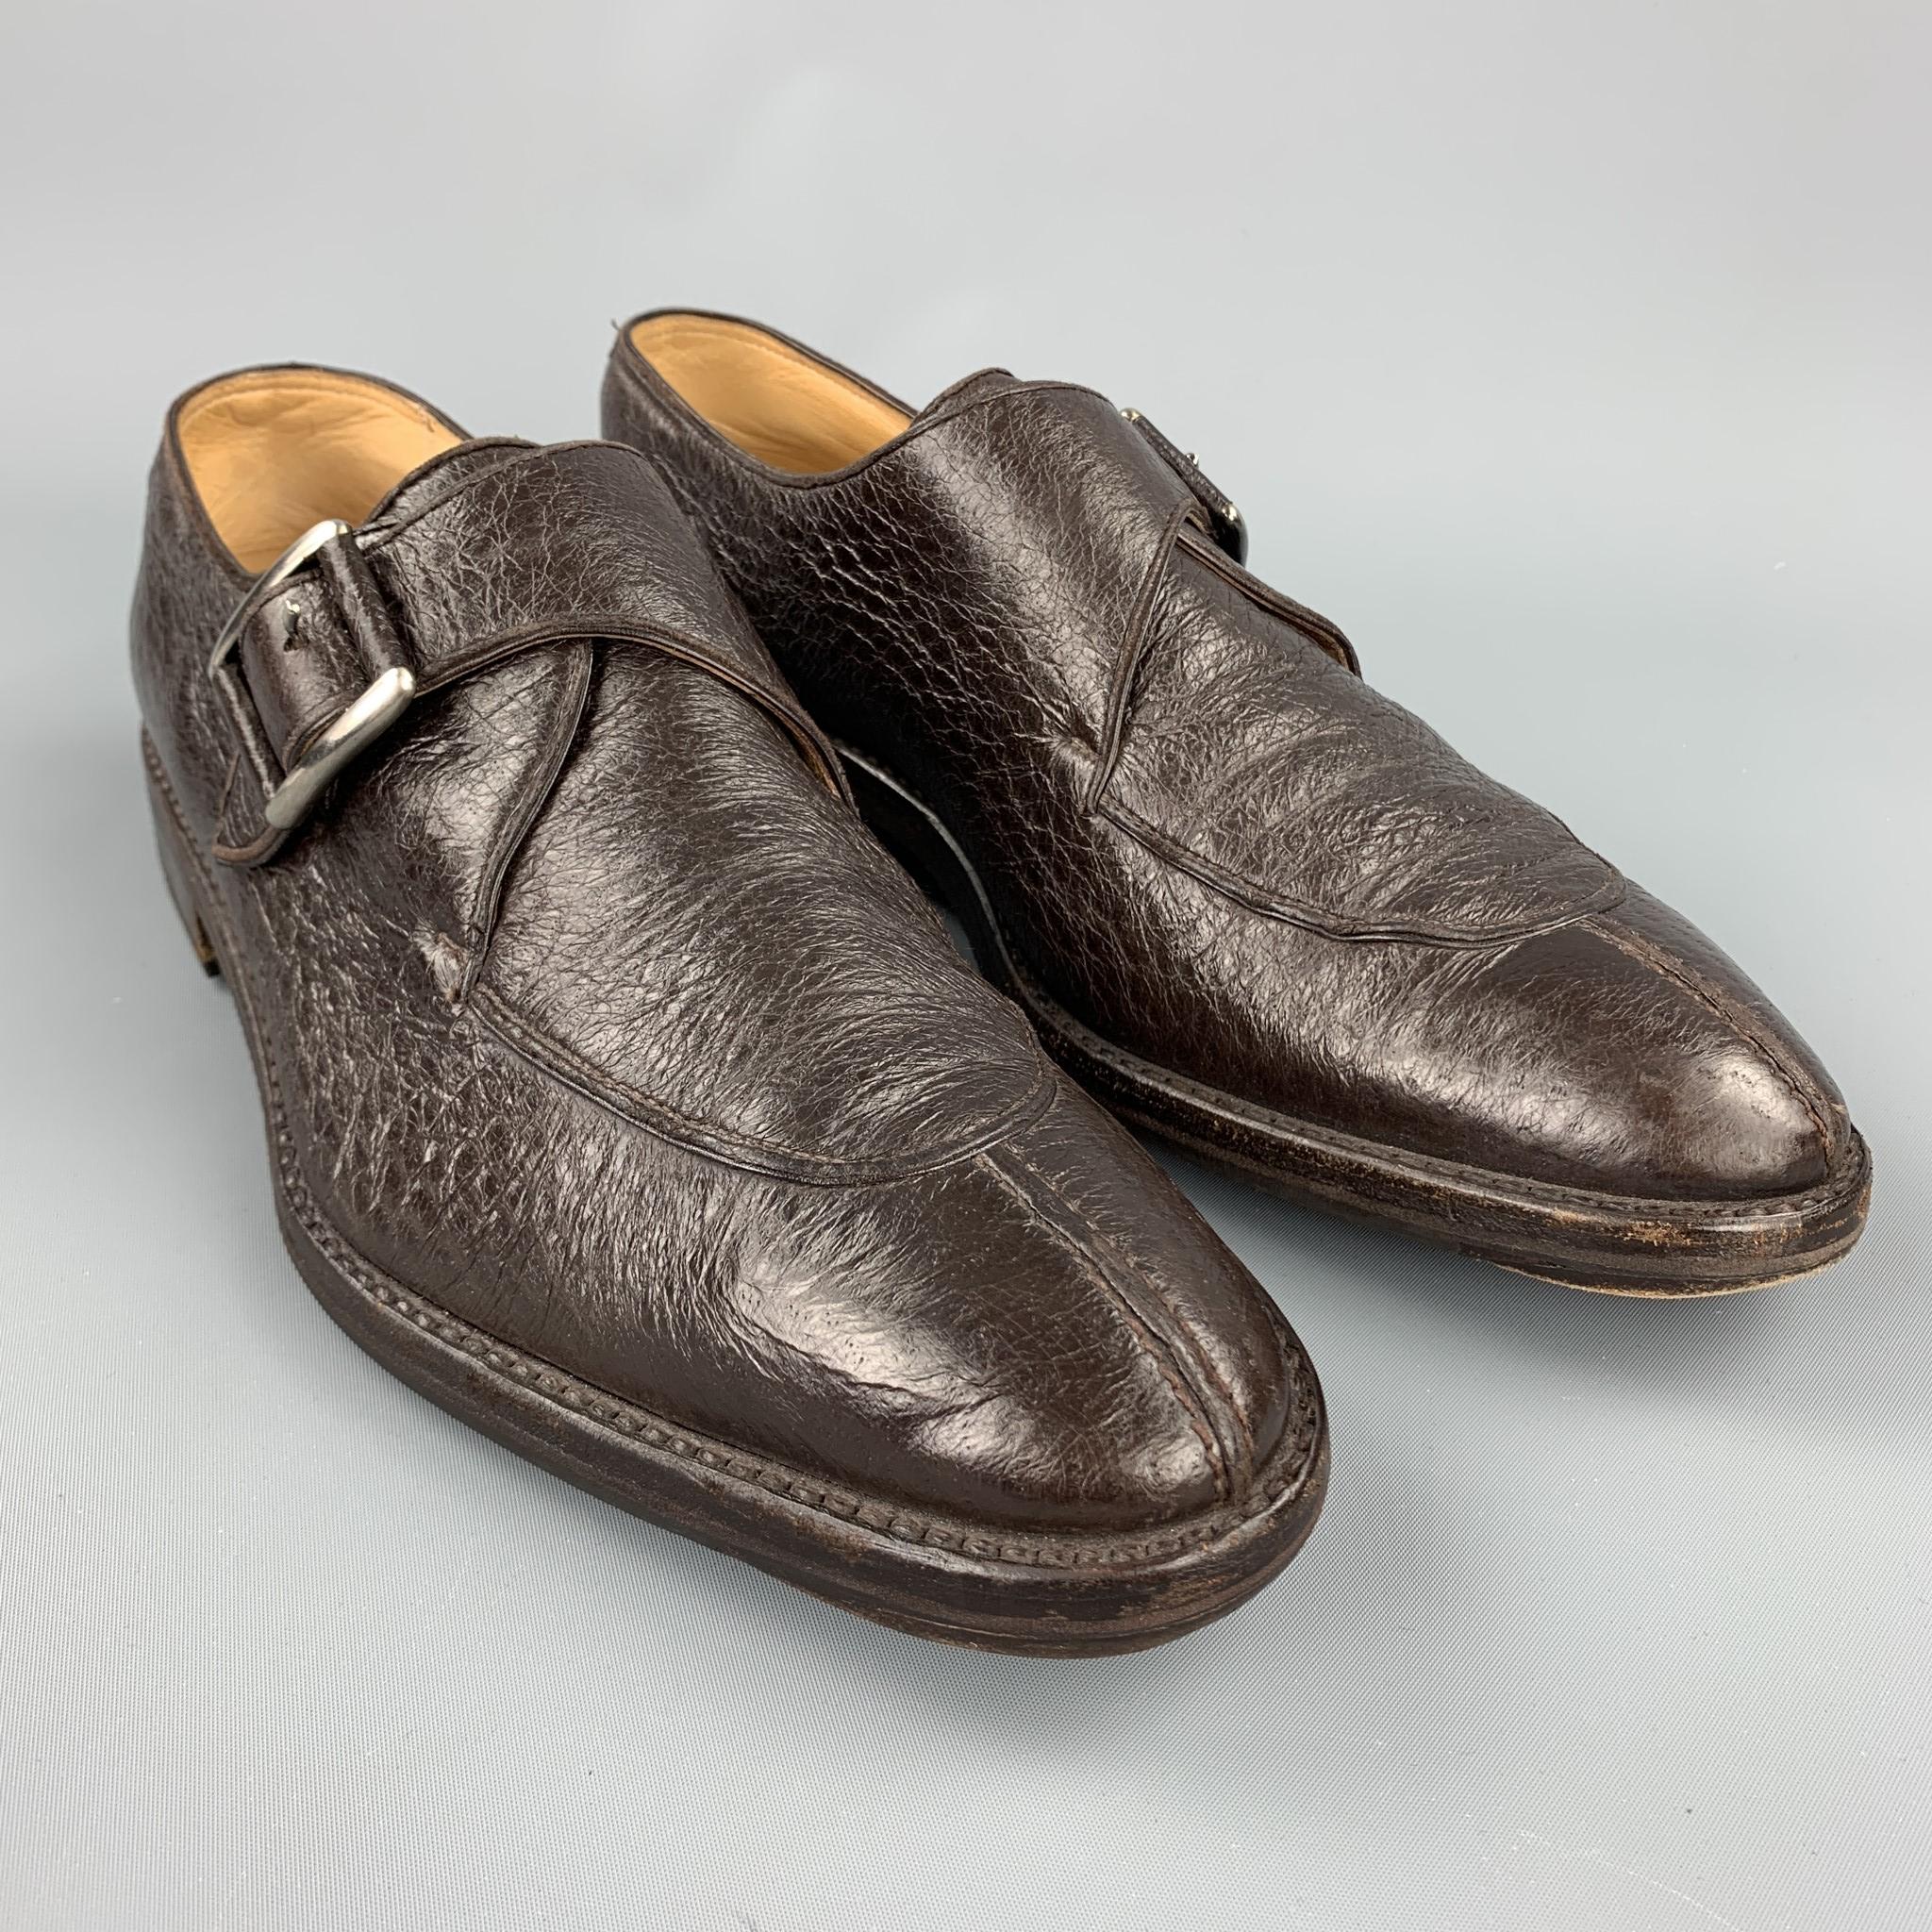 WILSON and DEAN for WILKES BASHFORD loafers comes in a brown textured leather featuring a monk strap with a wooden heel. Made in Italy.

Very Good Pre-Owned Condition.
Marked: 9.5

Outsole:

12 in. x 4 in. 

SKU: 103735
Category: Loafers

More